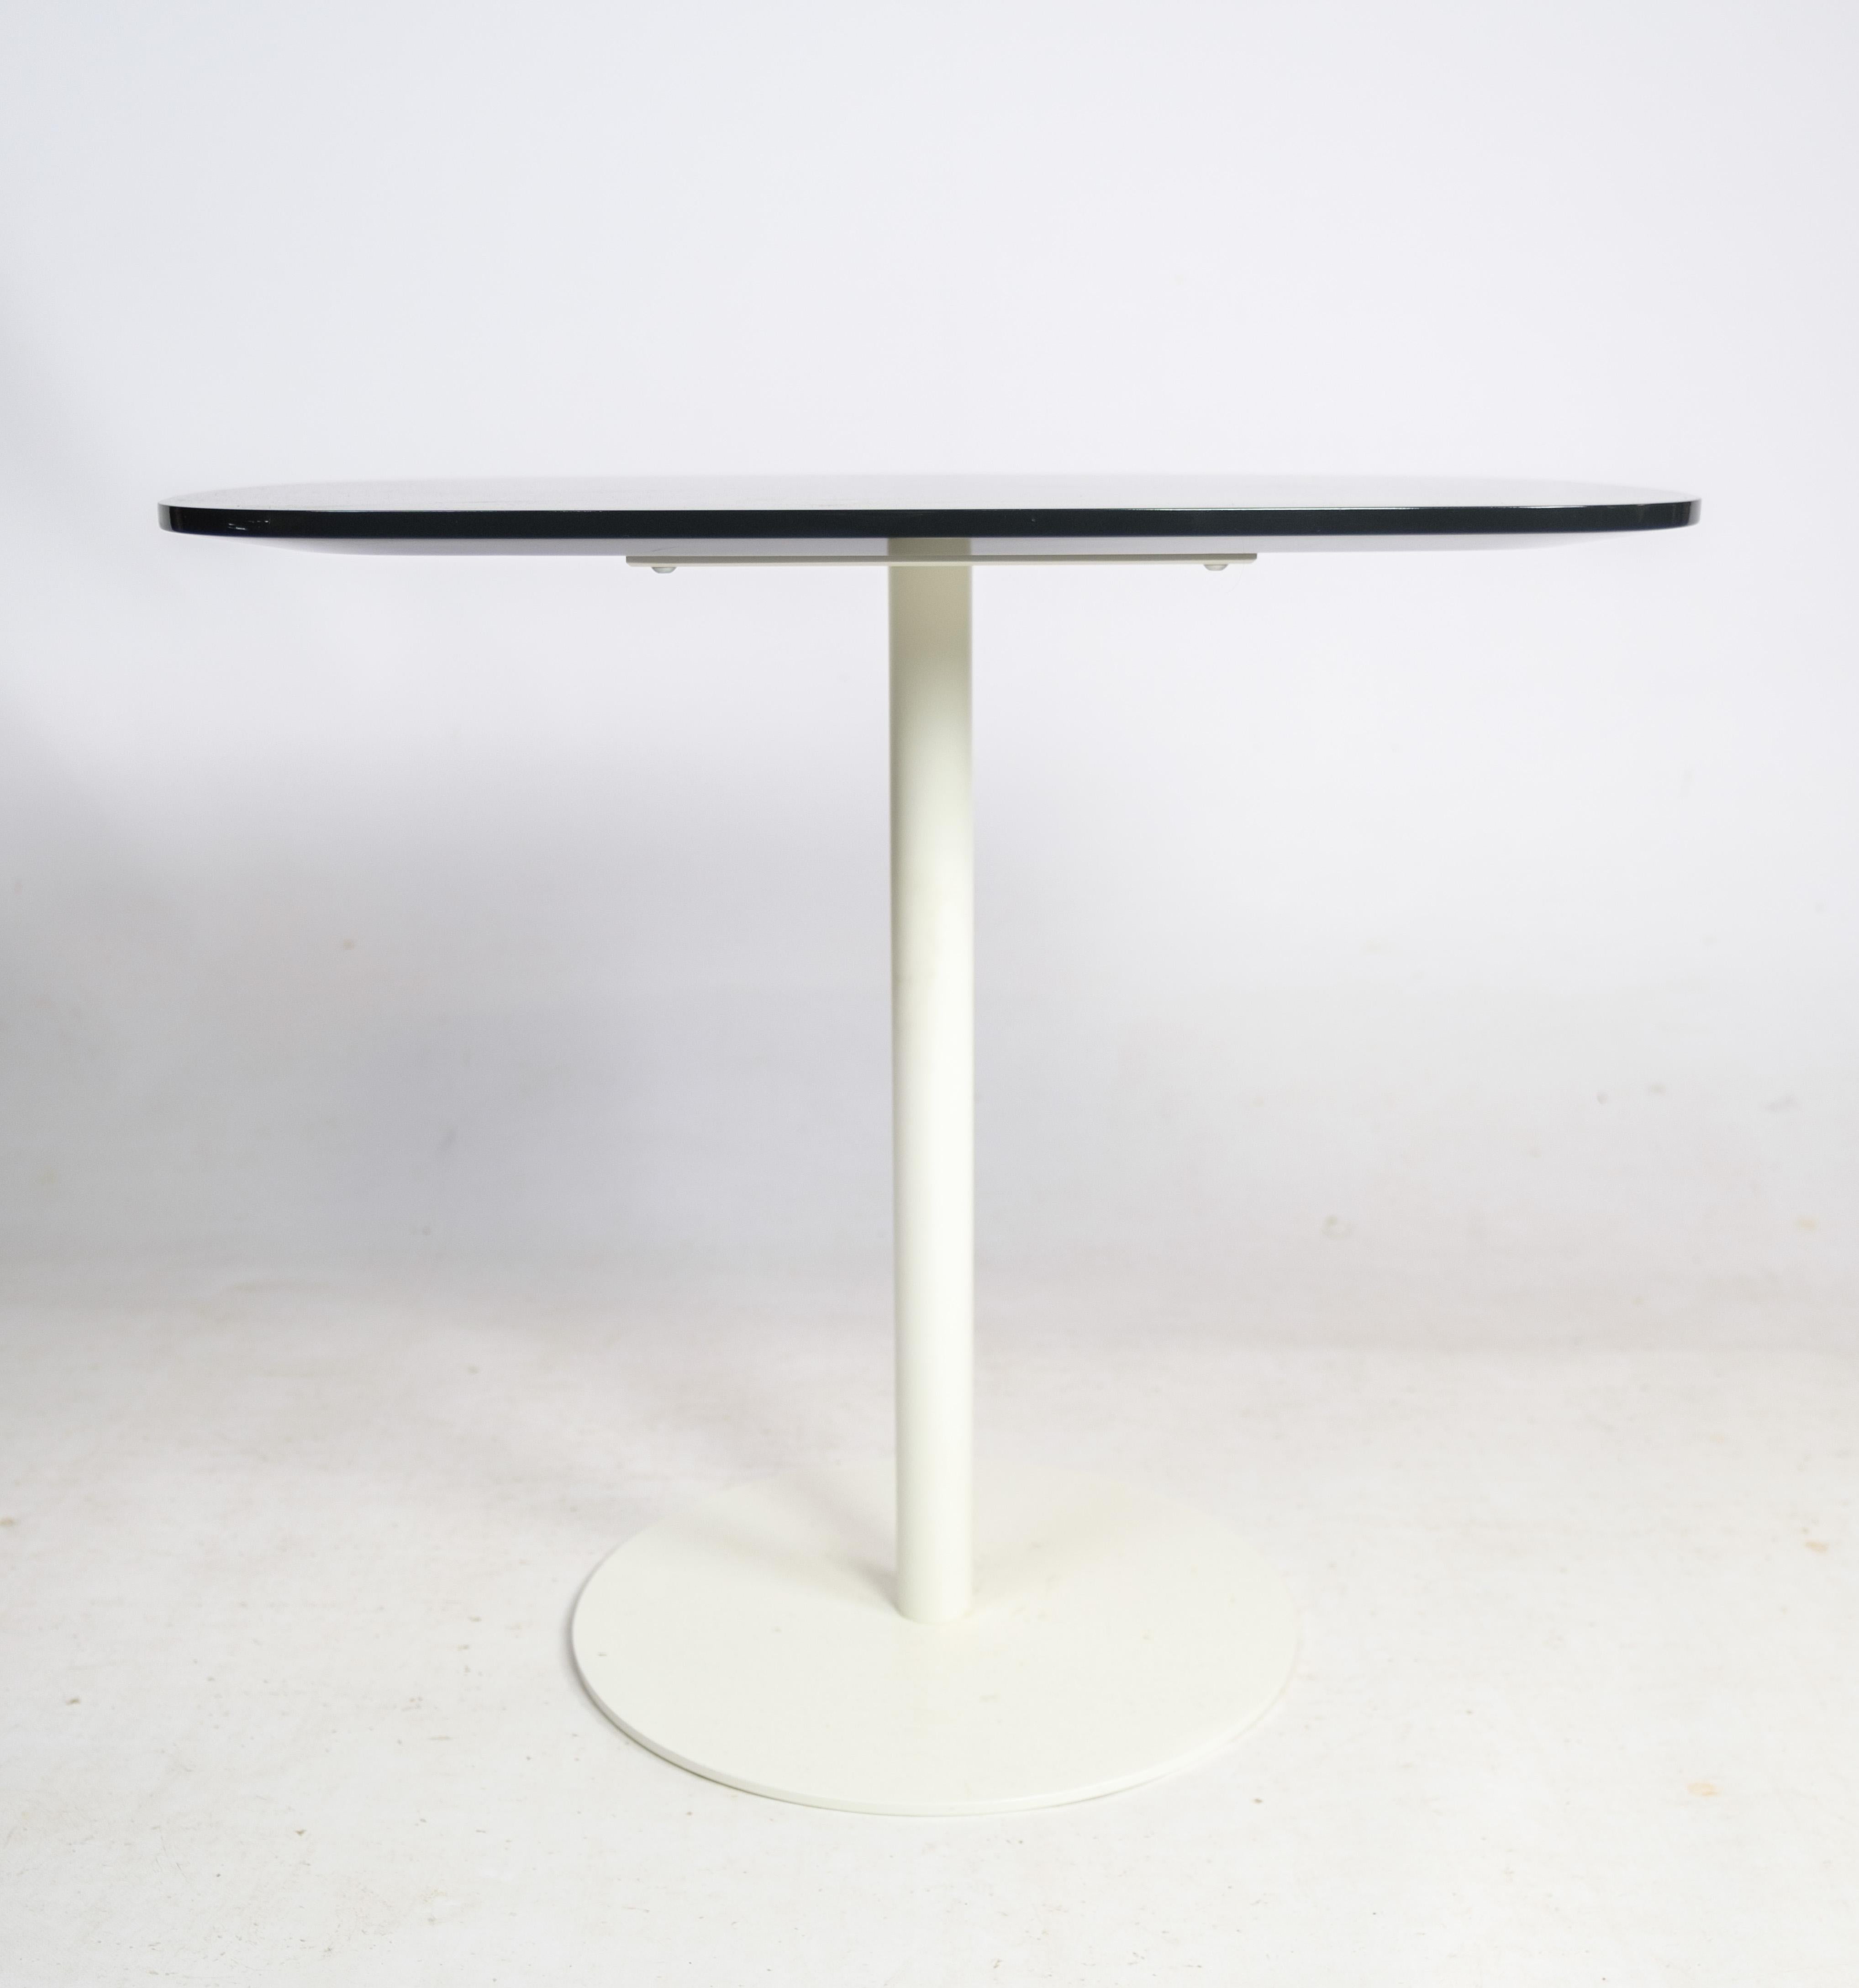 Coffee table, designed by Piero Lissoni with base in white lacquered metal, top in MDF, high gloss lacquered in the color anthracite manufactured by Fritz Hansen in 2006.

This product will be inspected thoroughly at our professional workshop by